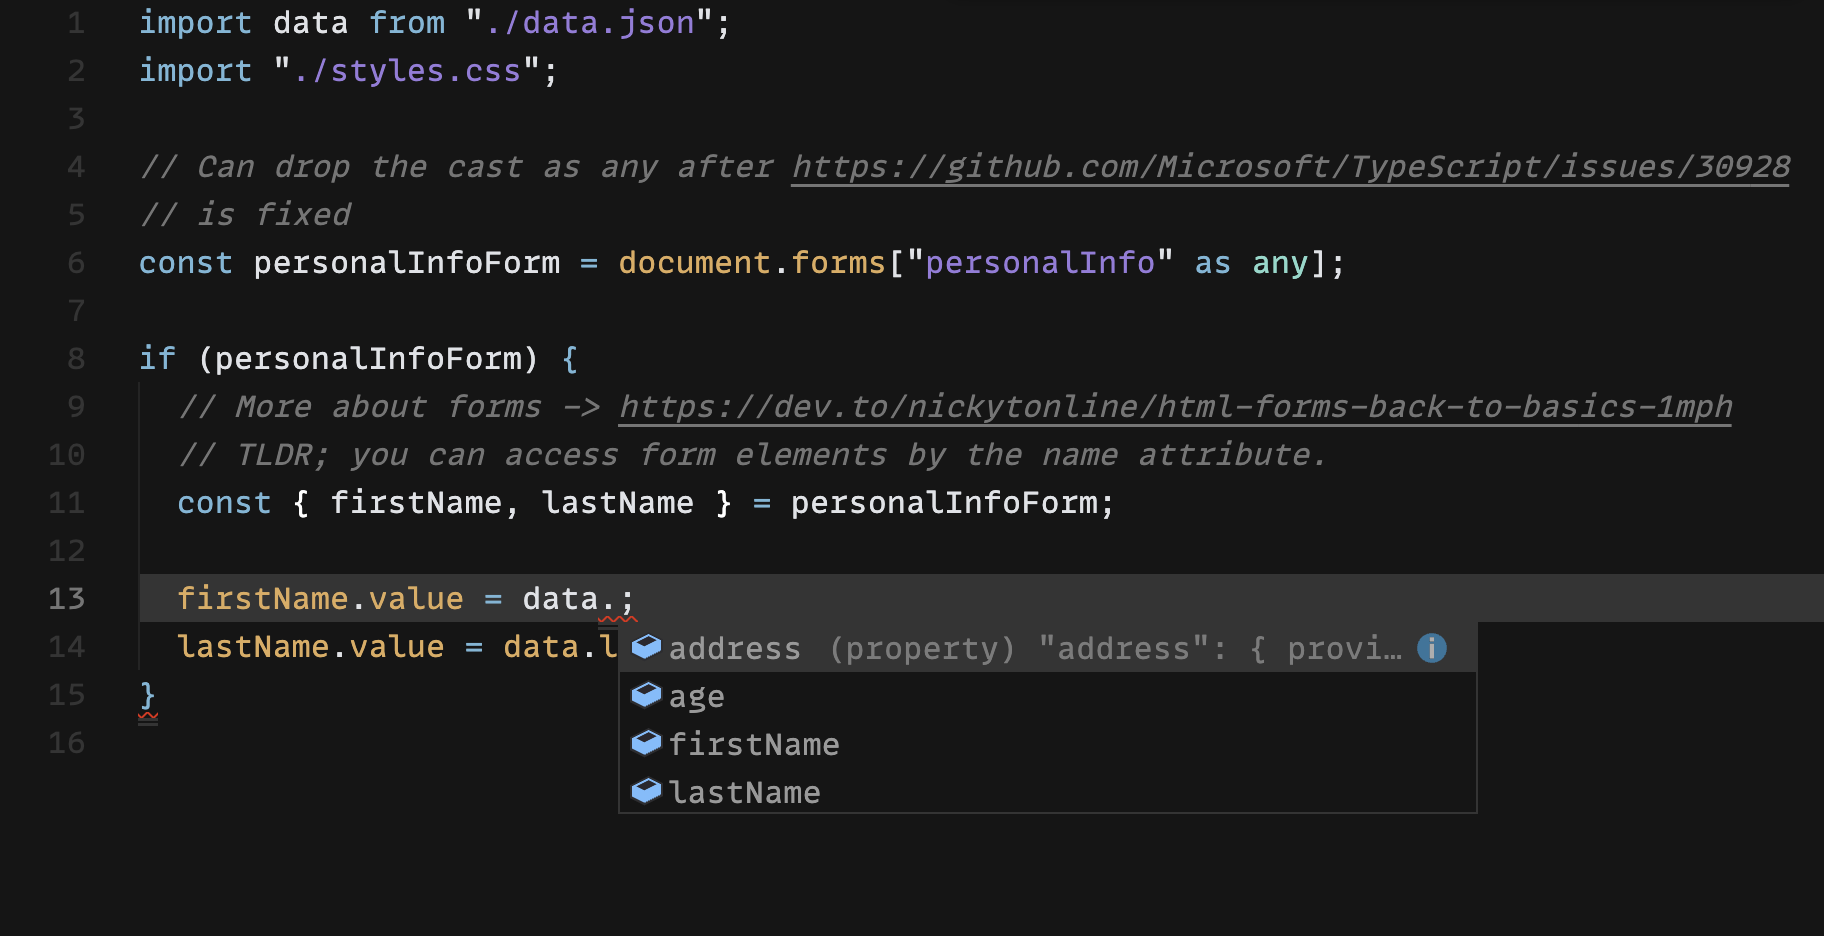 data variable in VS Code displaying autocomplete with properties of the data object